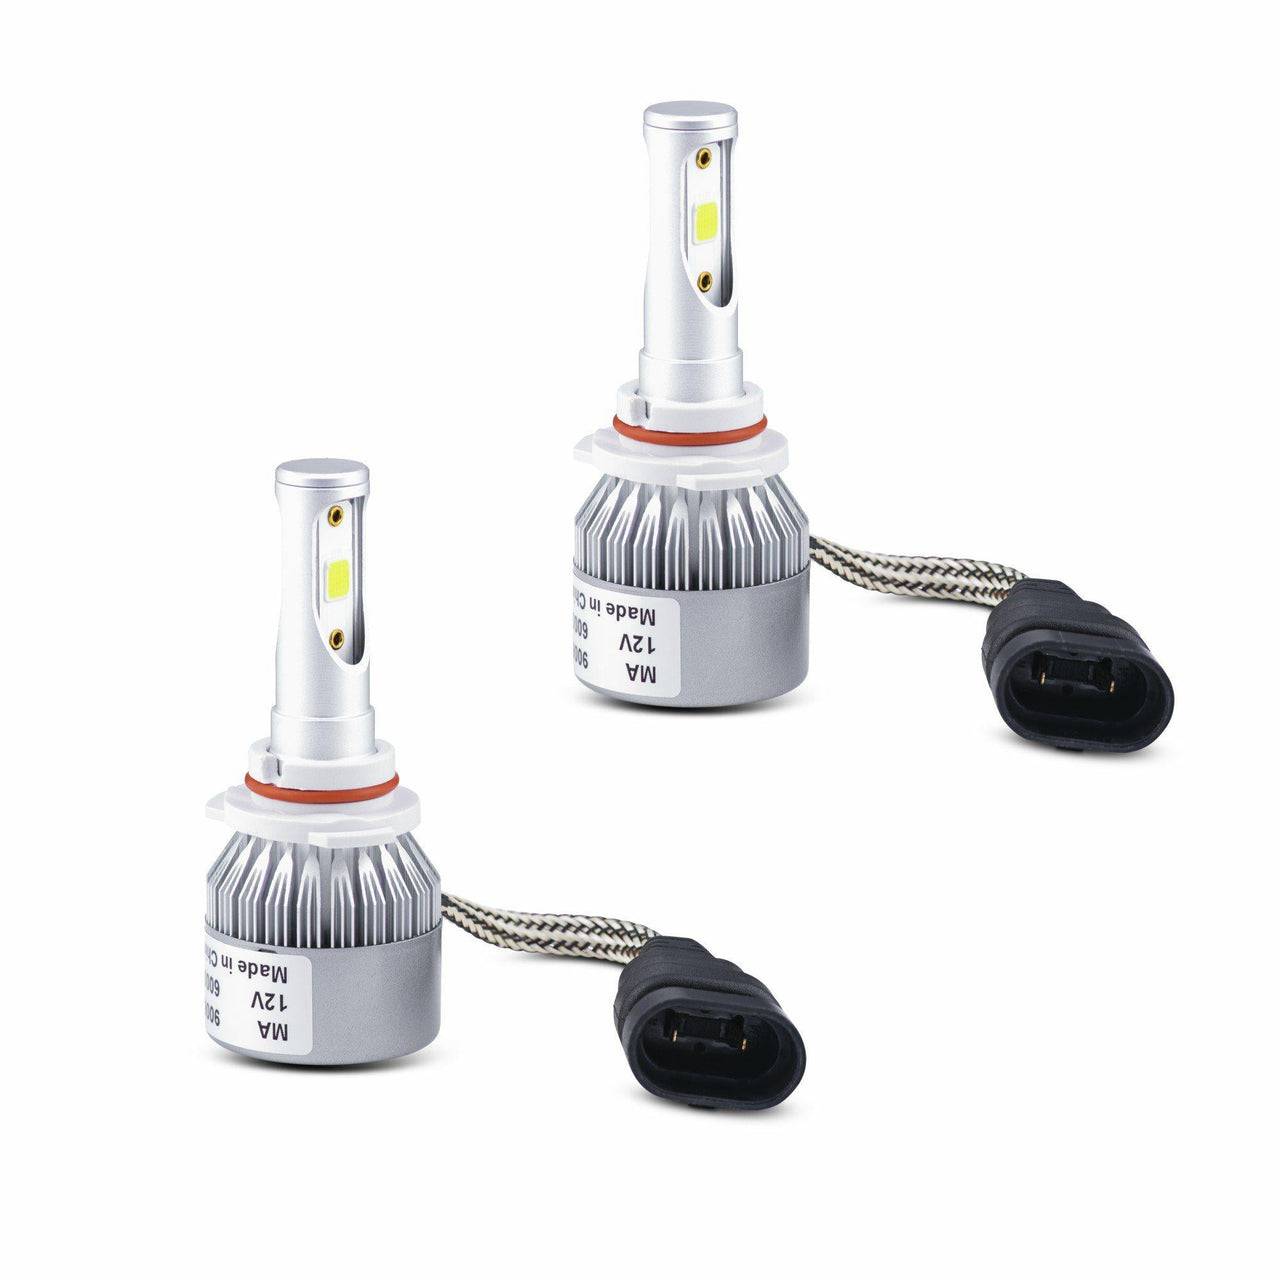 9006 LED Headlight Conversion Kit also known as HB4 9006 9012